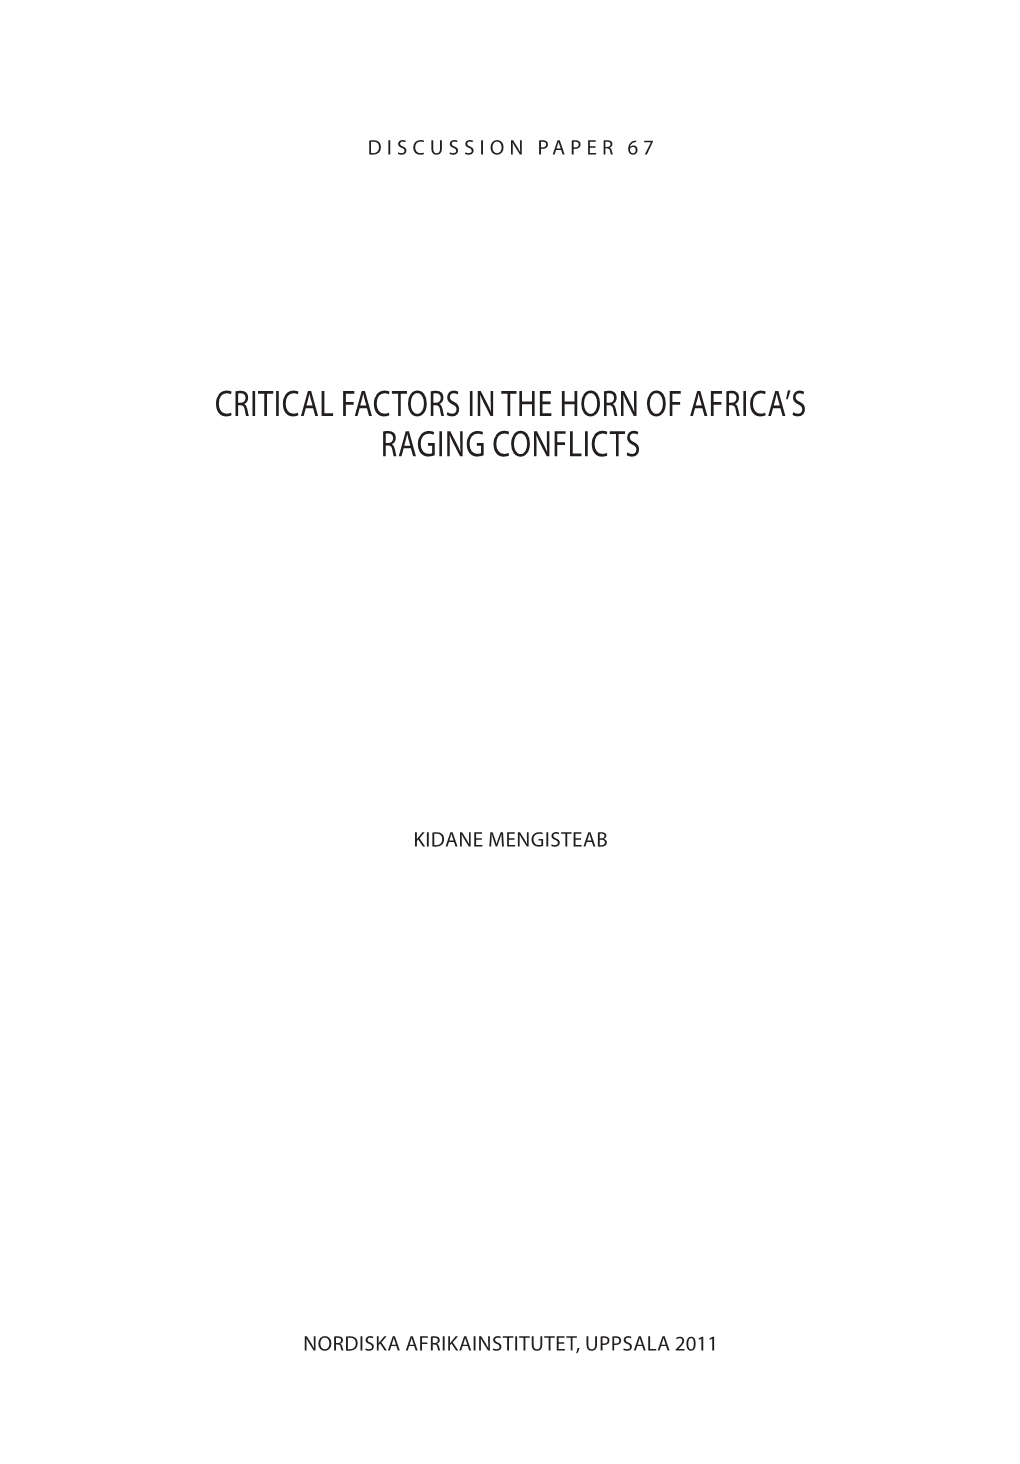 Critical Factors in the Horn of Africa's Raging Conflicts